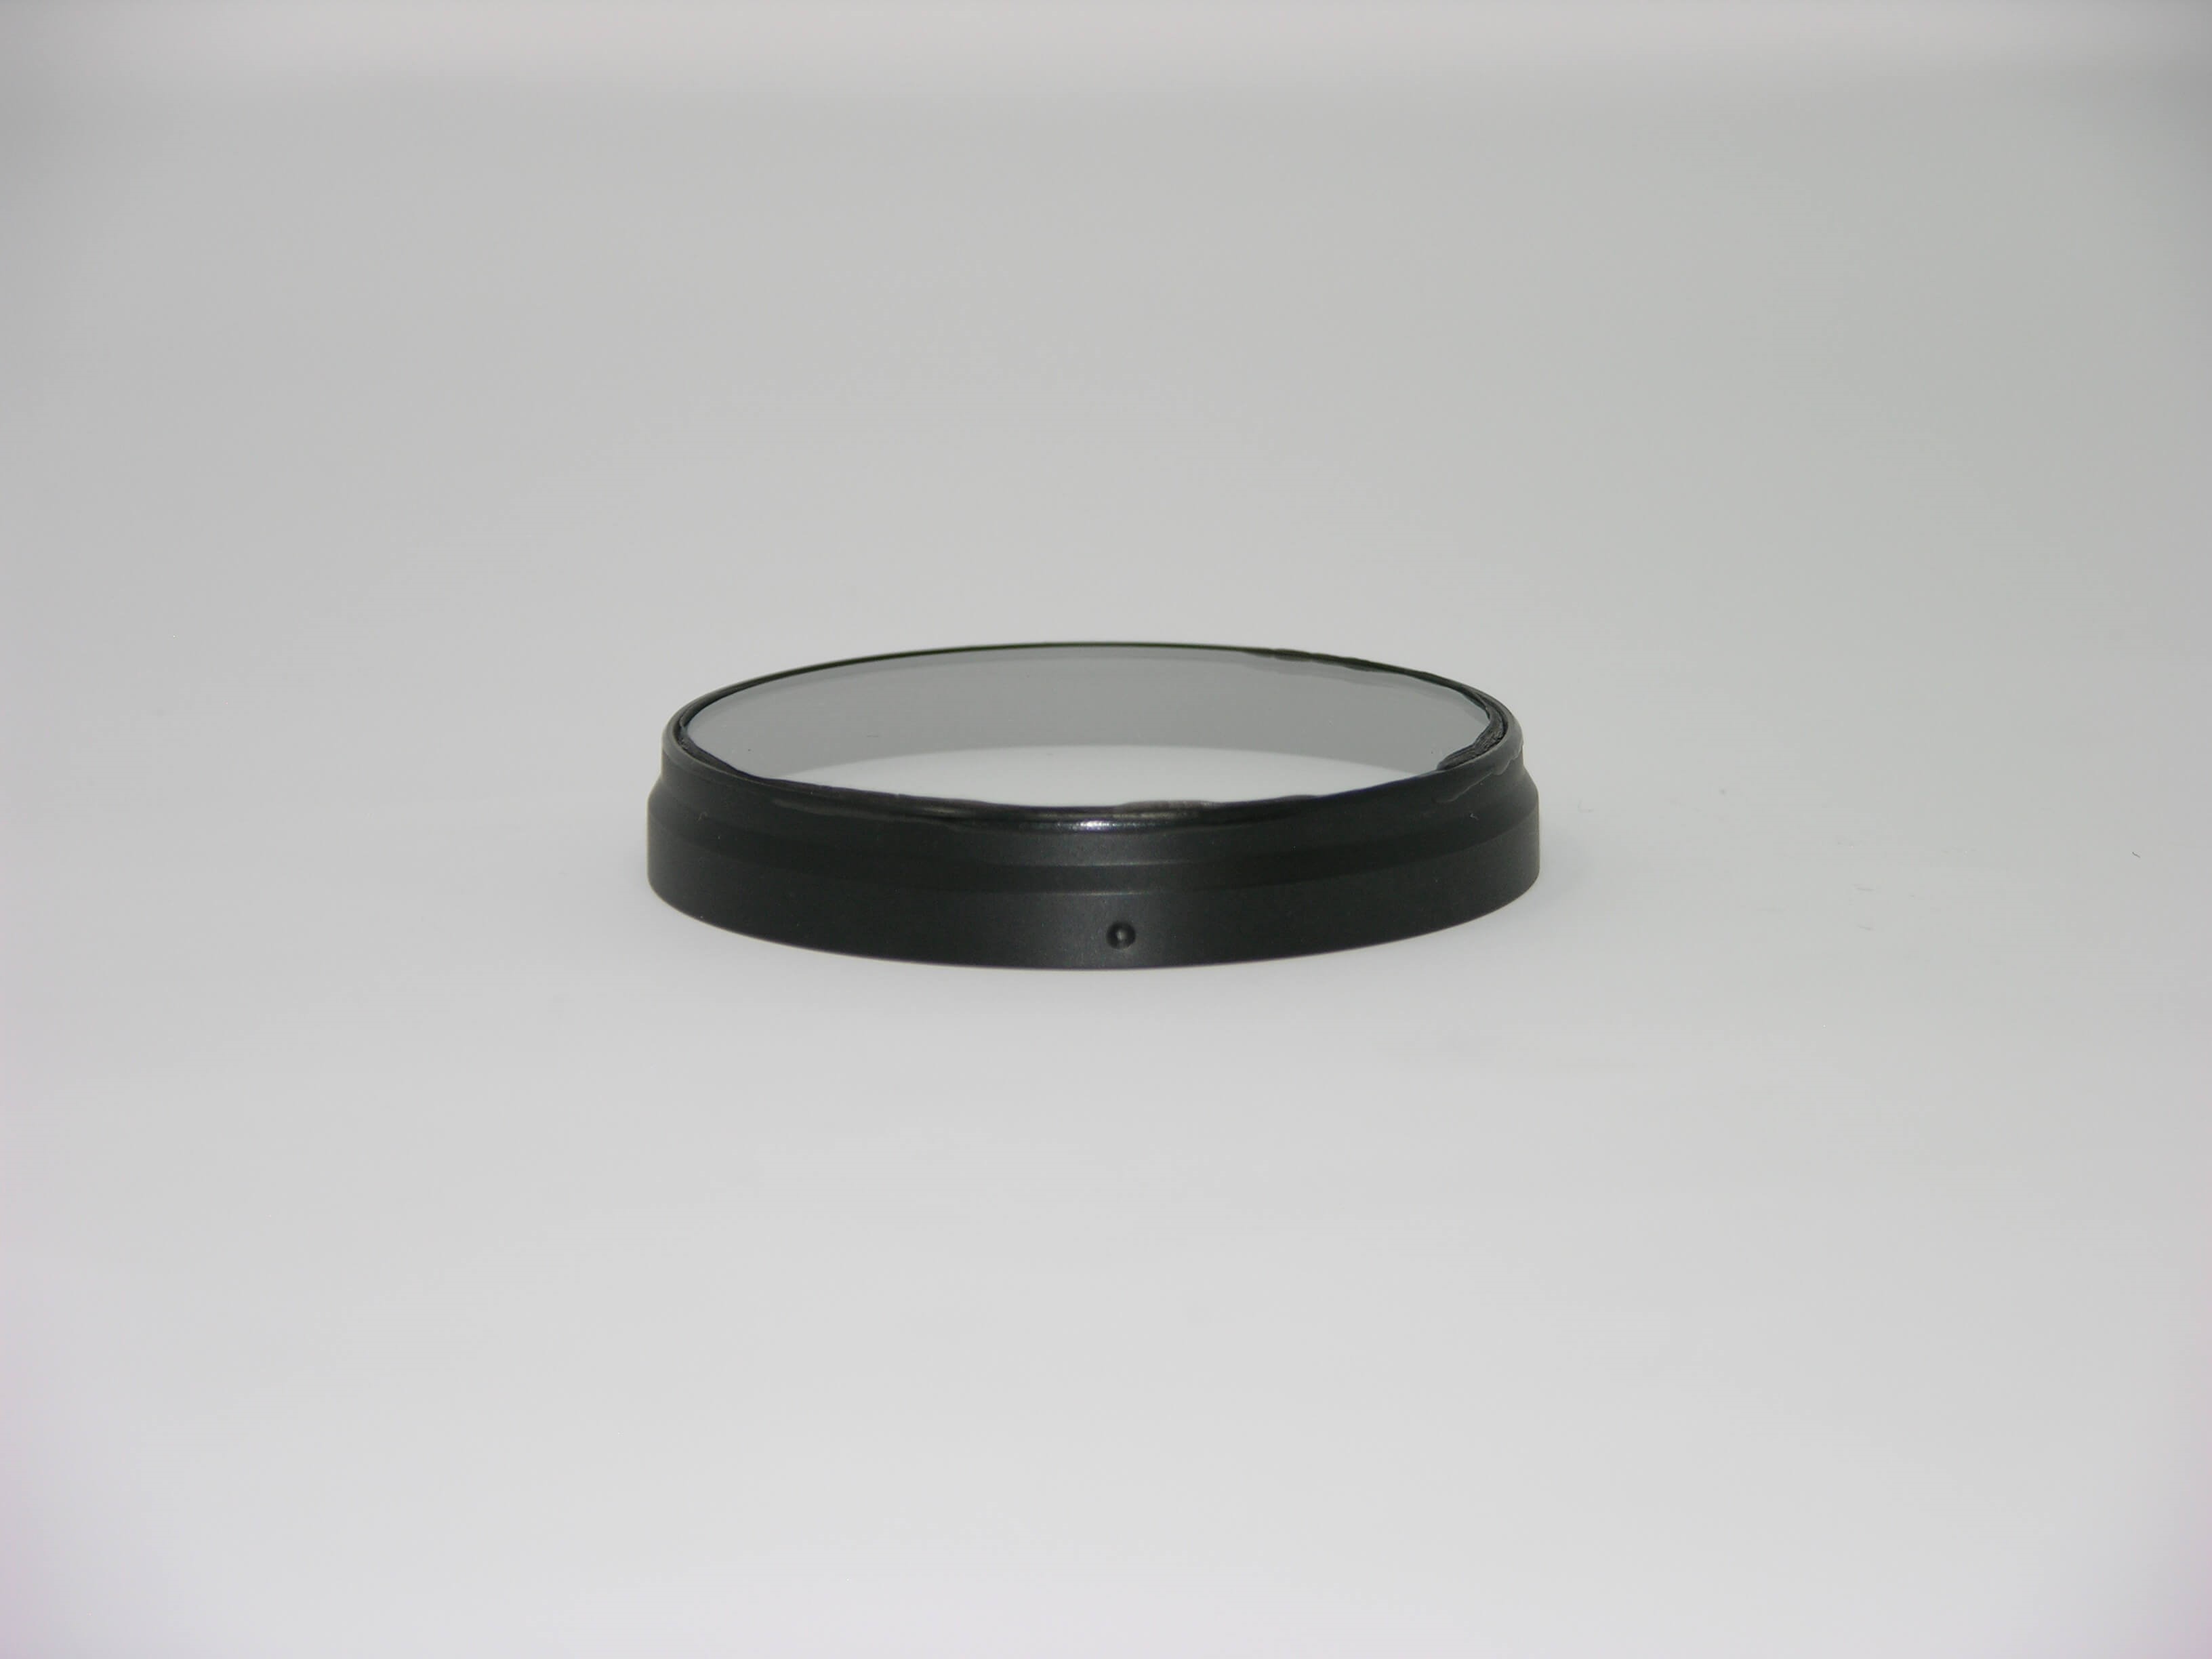 Disposable Lens Protection Cap for 6x SLWD